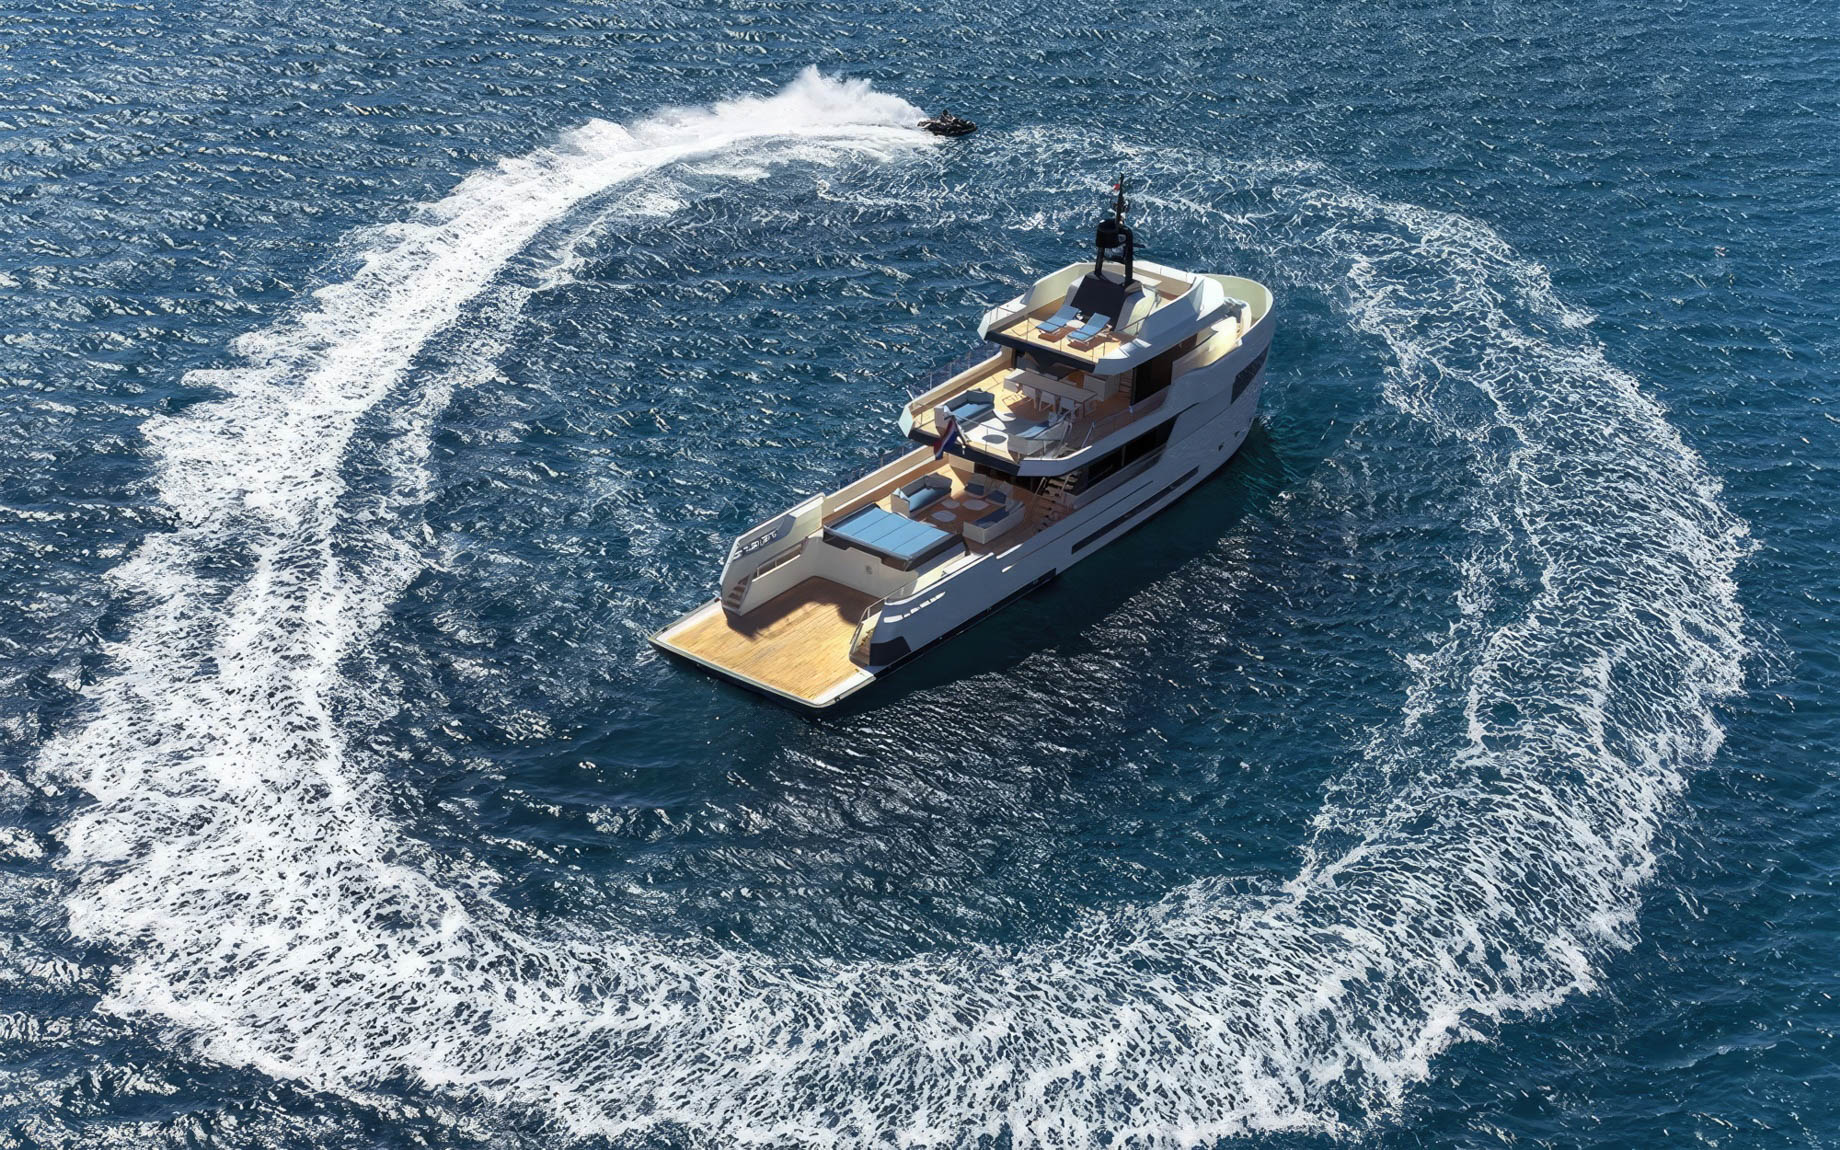 The Adventure Series – A Line of Explorer Yachts For Sale Conceived by Lynx Yachts to Navigate the World – Seafaring Fun